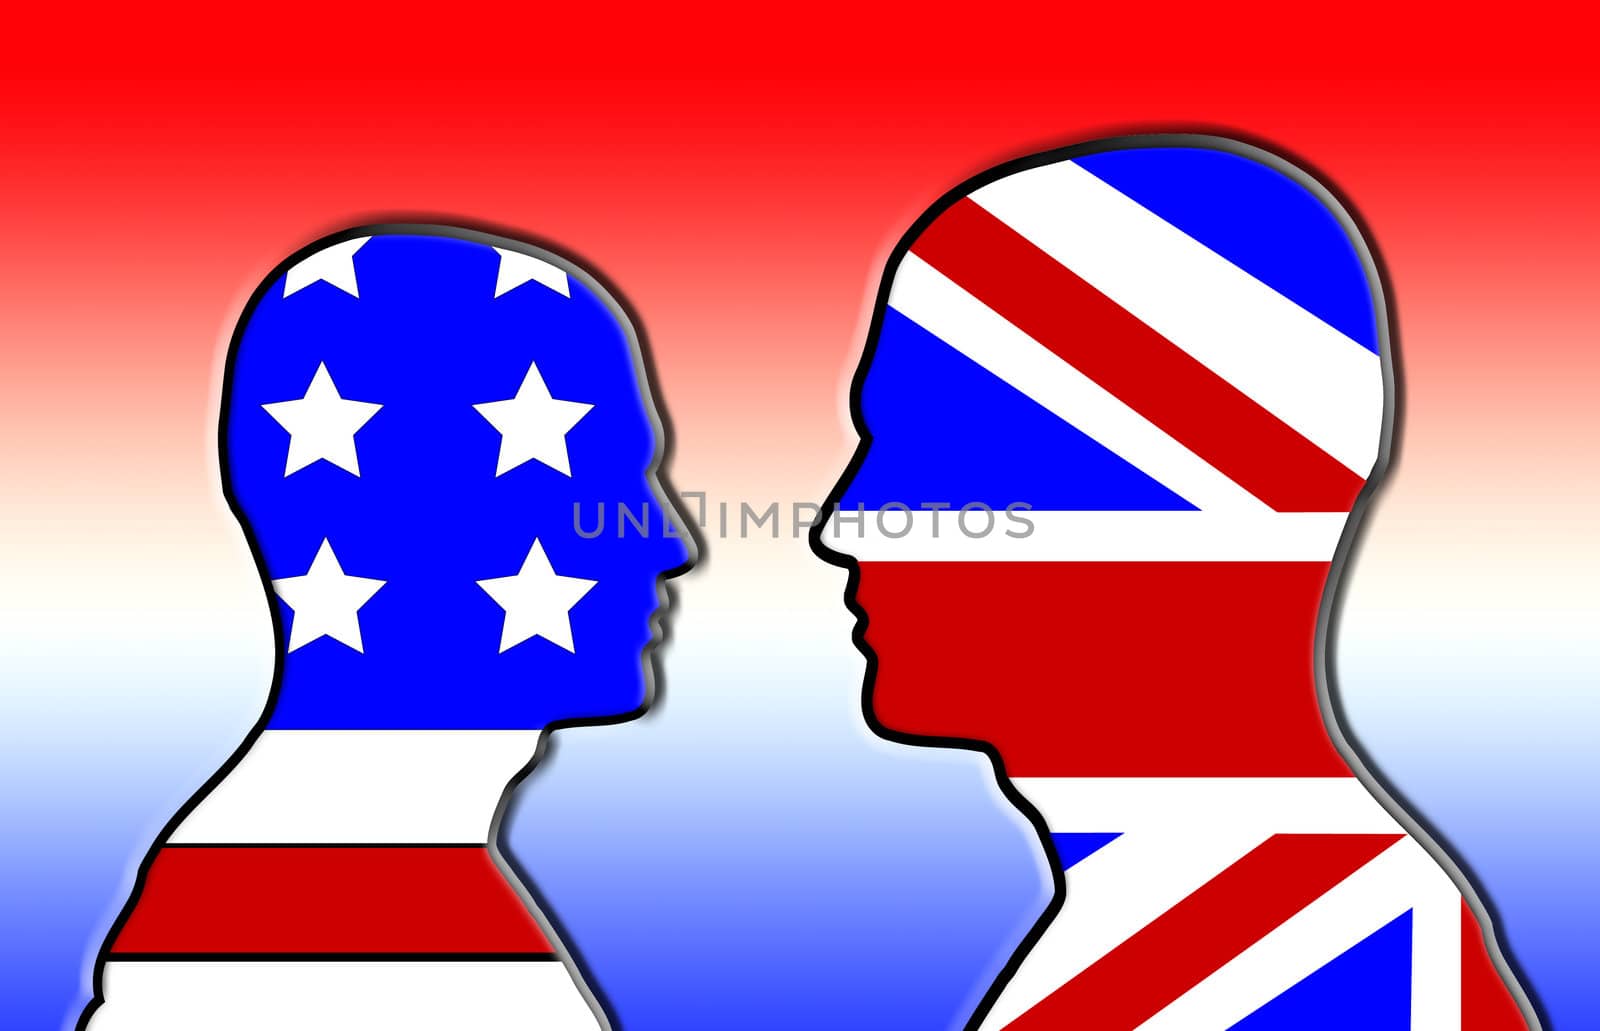 Concept image showing heads made out of the American and British flags.